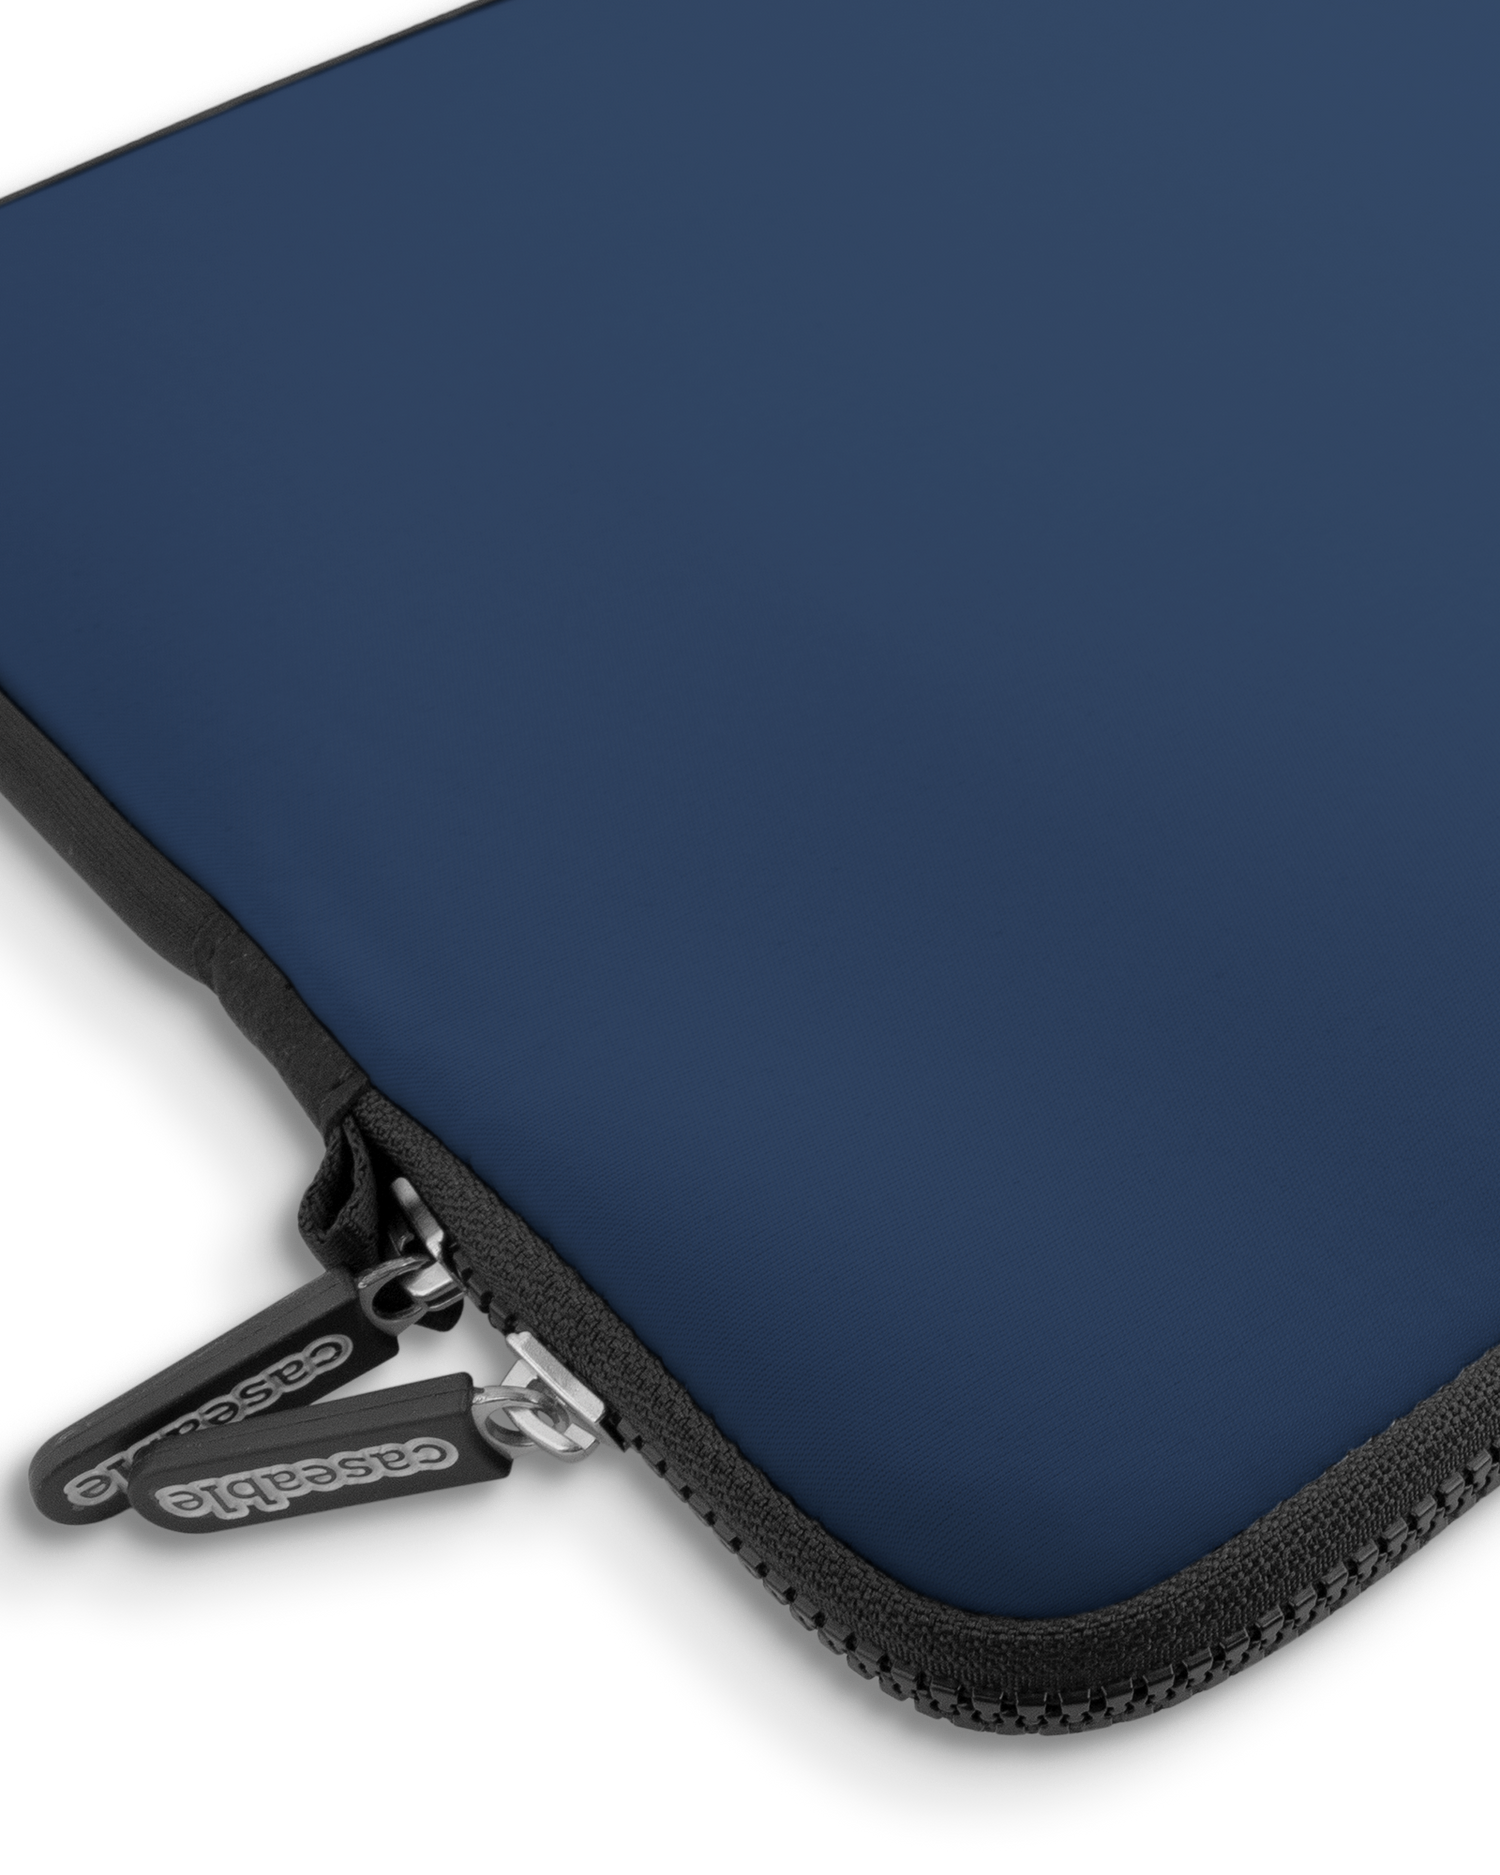 NAVY Premium Laptop Bag 15 inch with device inside